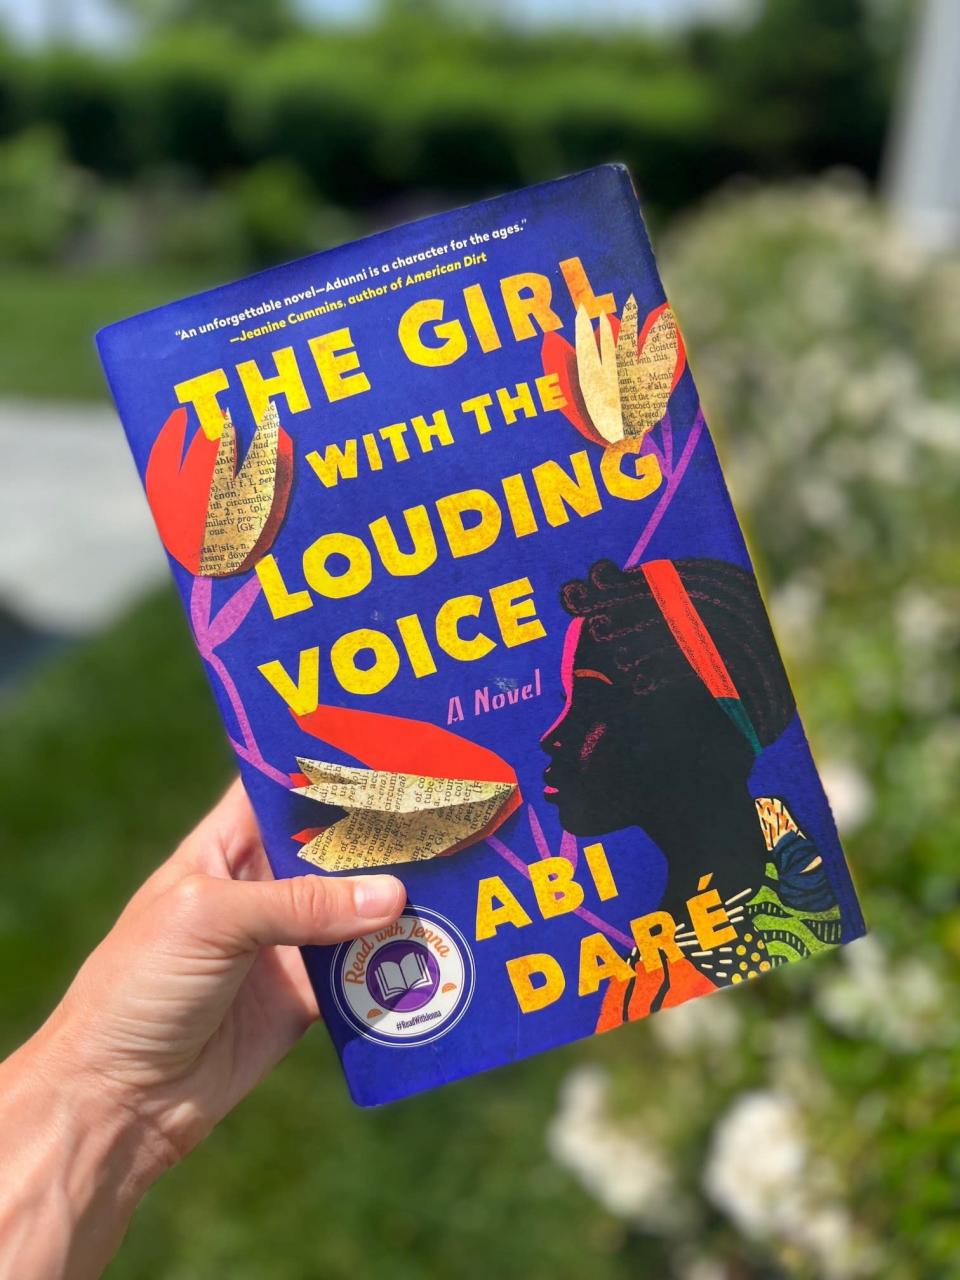 A hand holding &quot;The Girl with the Louding Voice&quot; by Abi Daré.